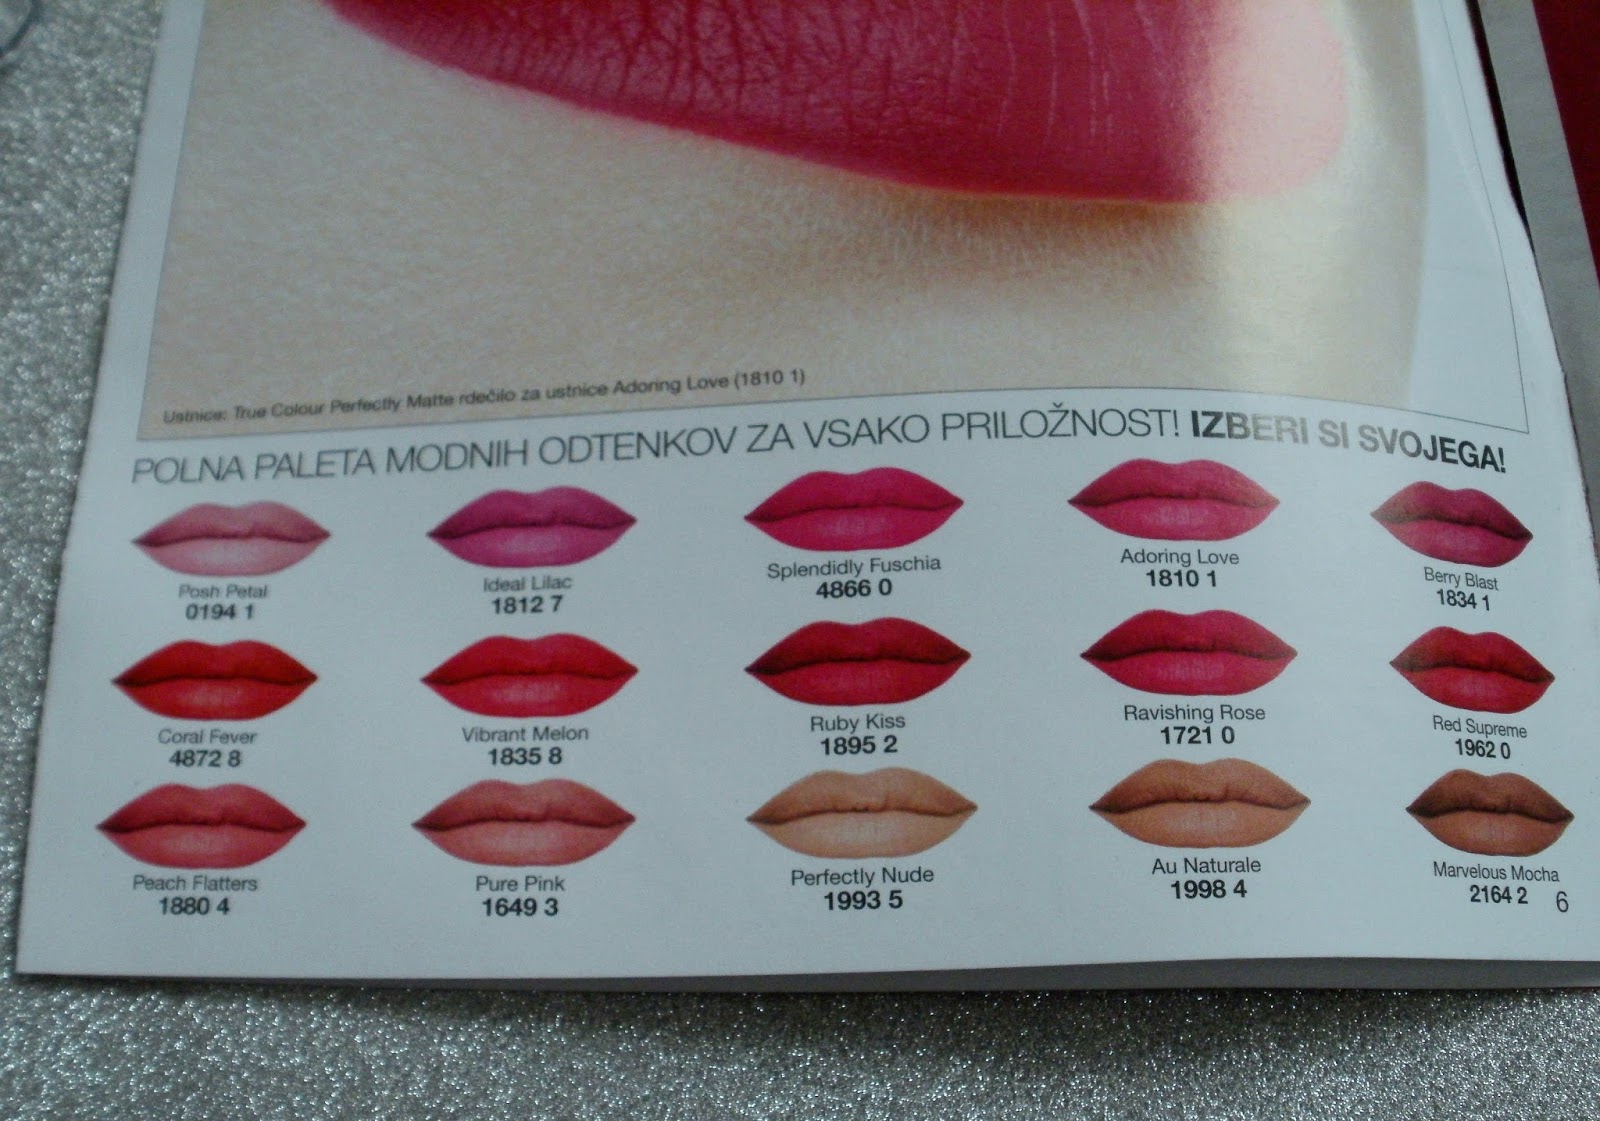 Confessions Of A Makeup Shopaholic Avon True Colour Perfectly Matte Lipsticks Swatches